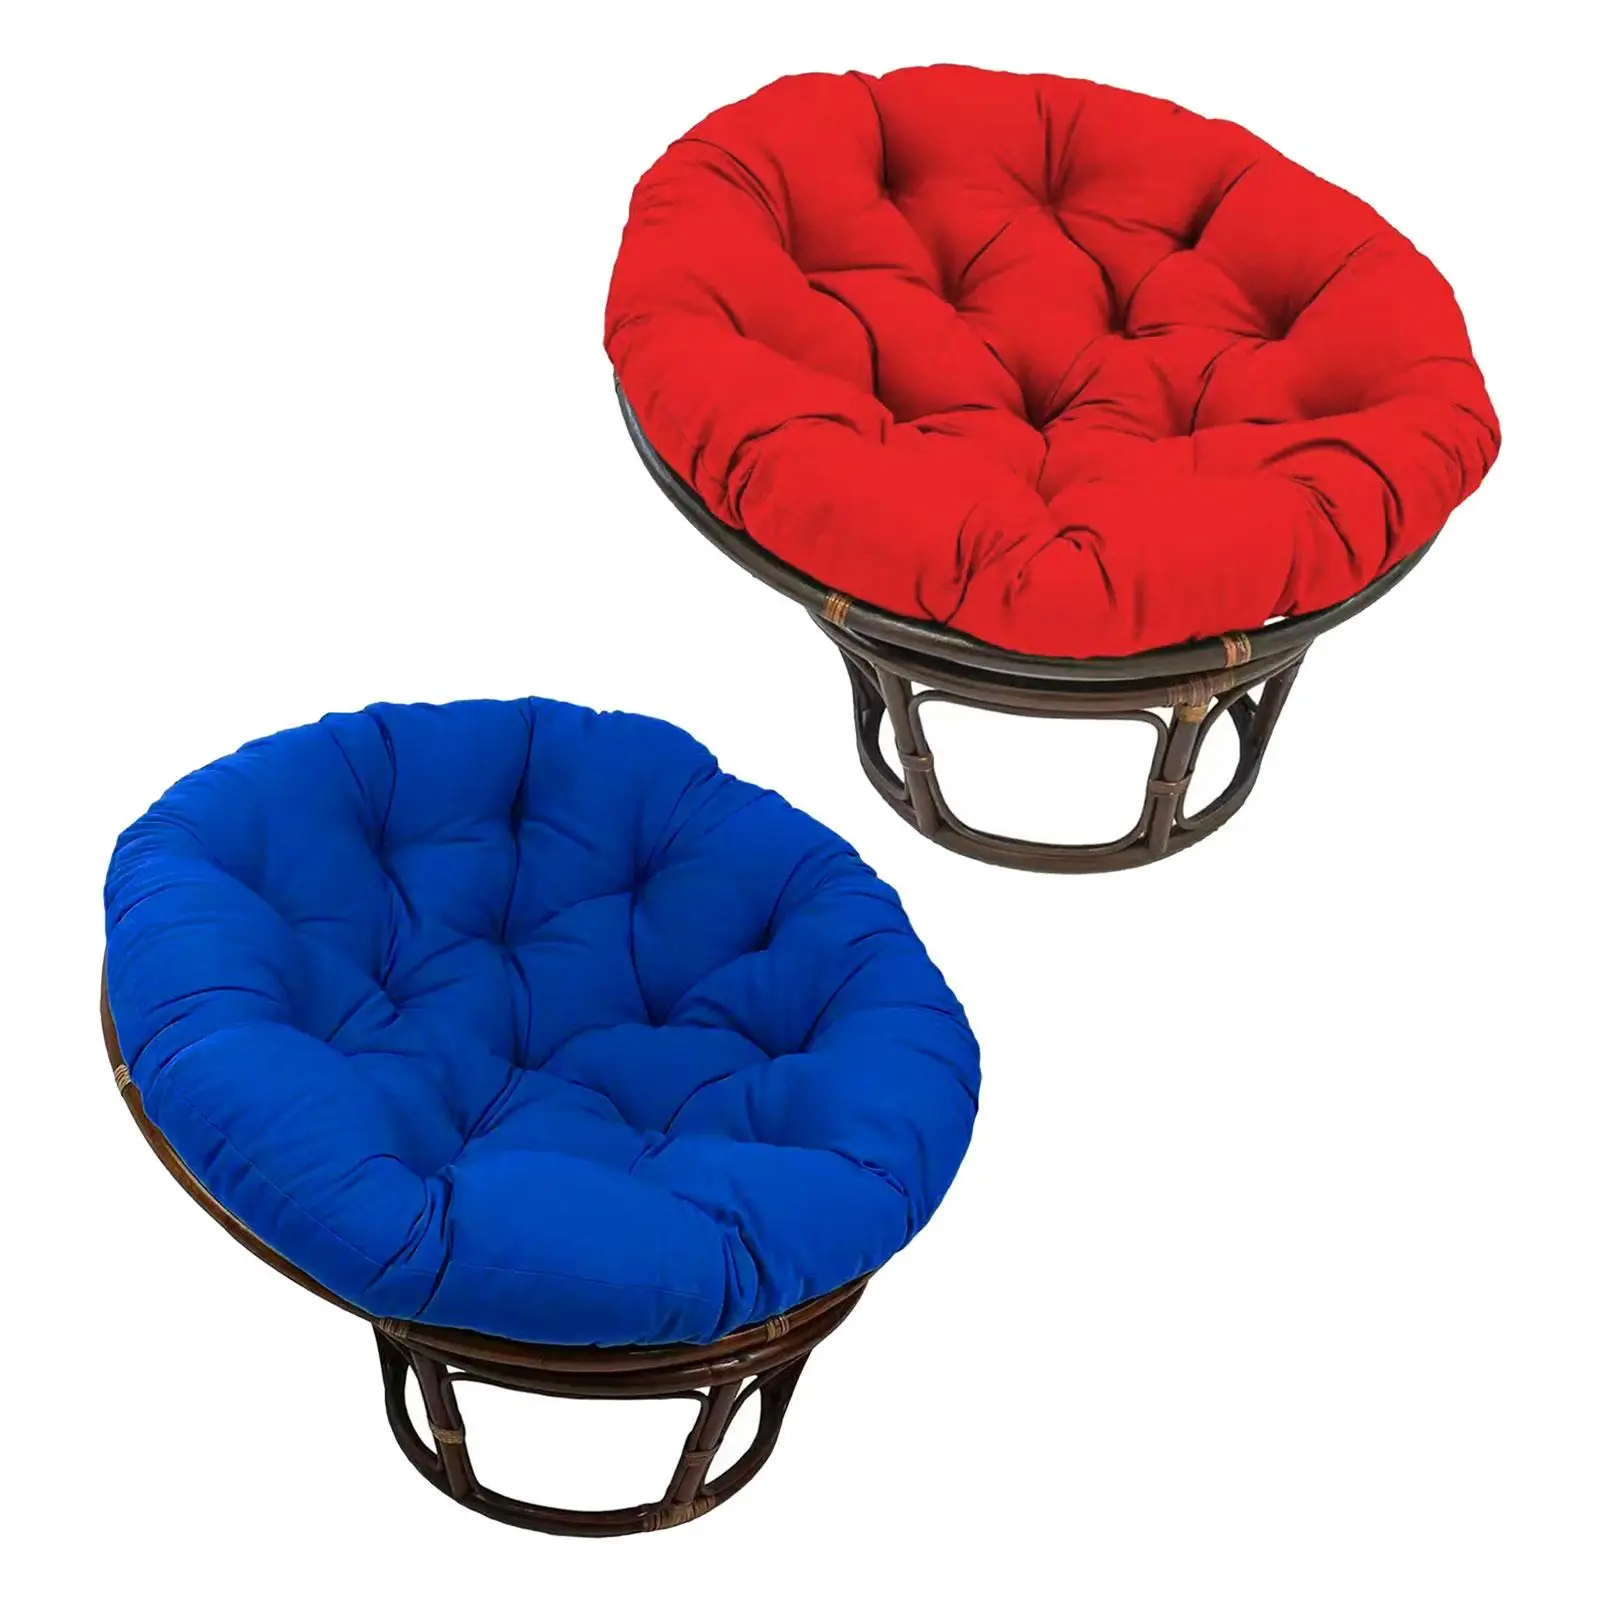 Thickened Overstuffed Round Cushion 60cmx60cm Egg Chair Swing Chair Pads for Hanging Beds Hanging Baskets Rocking Chairs